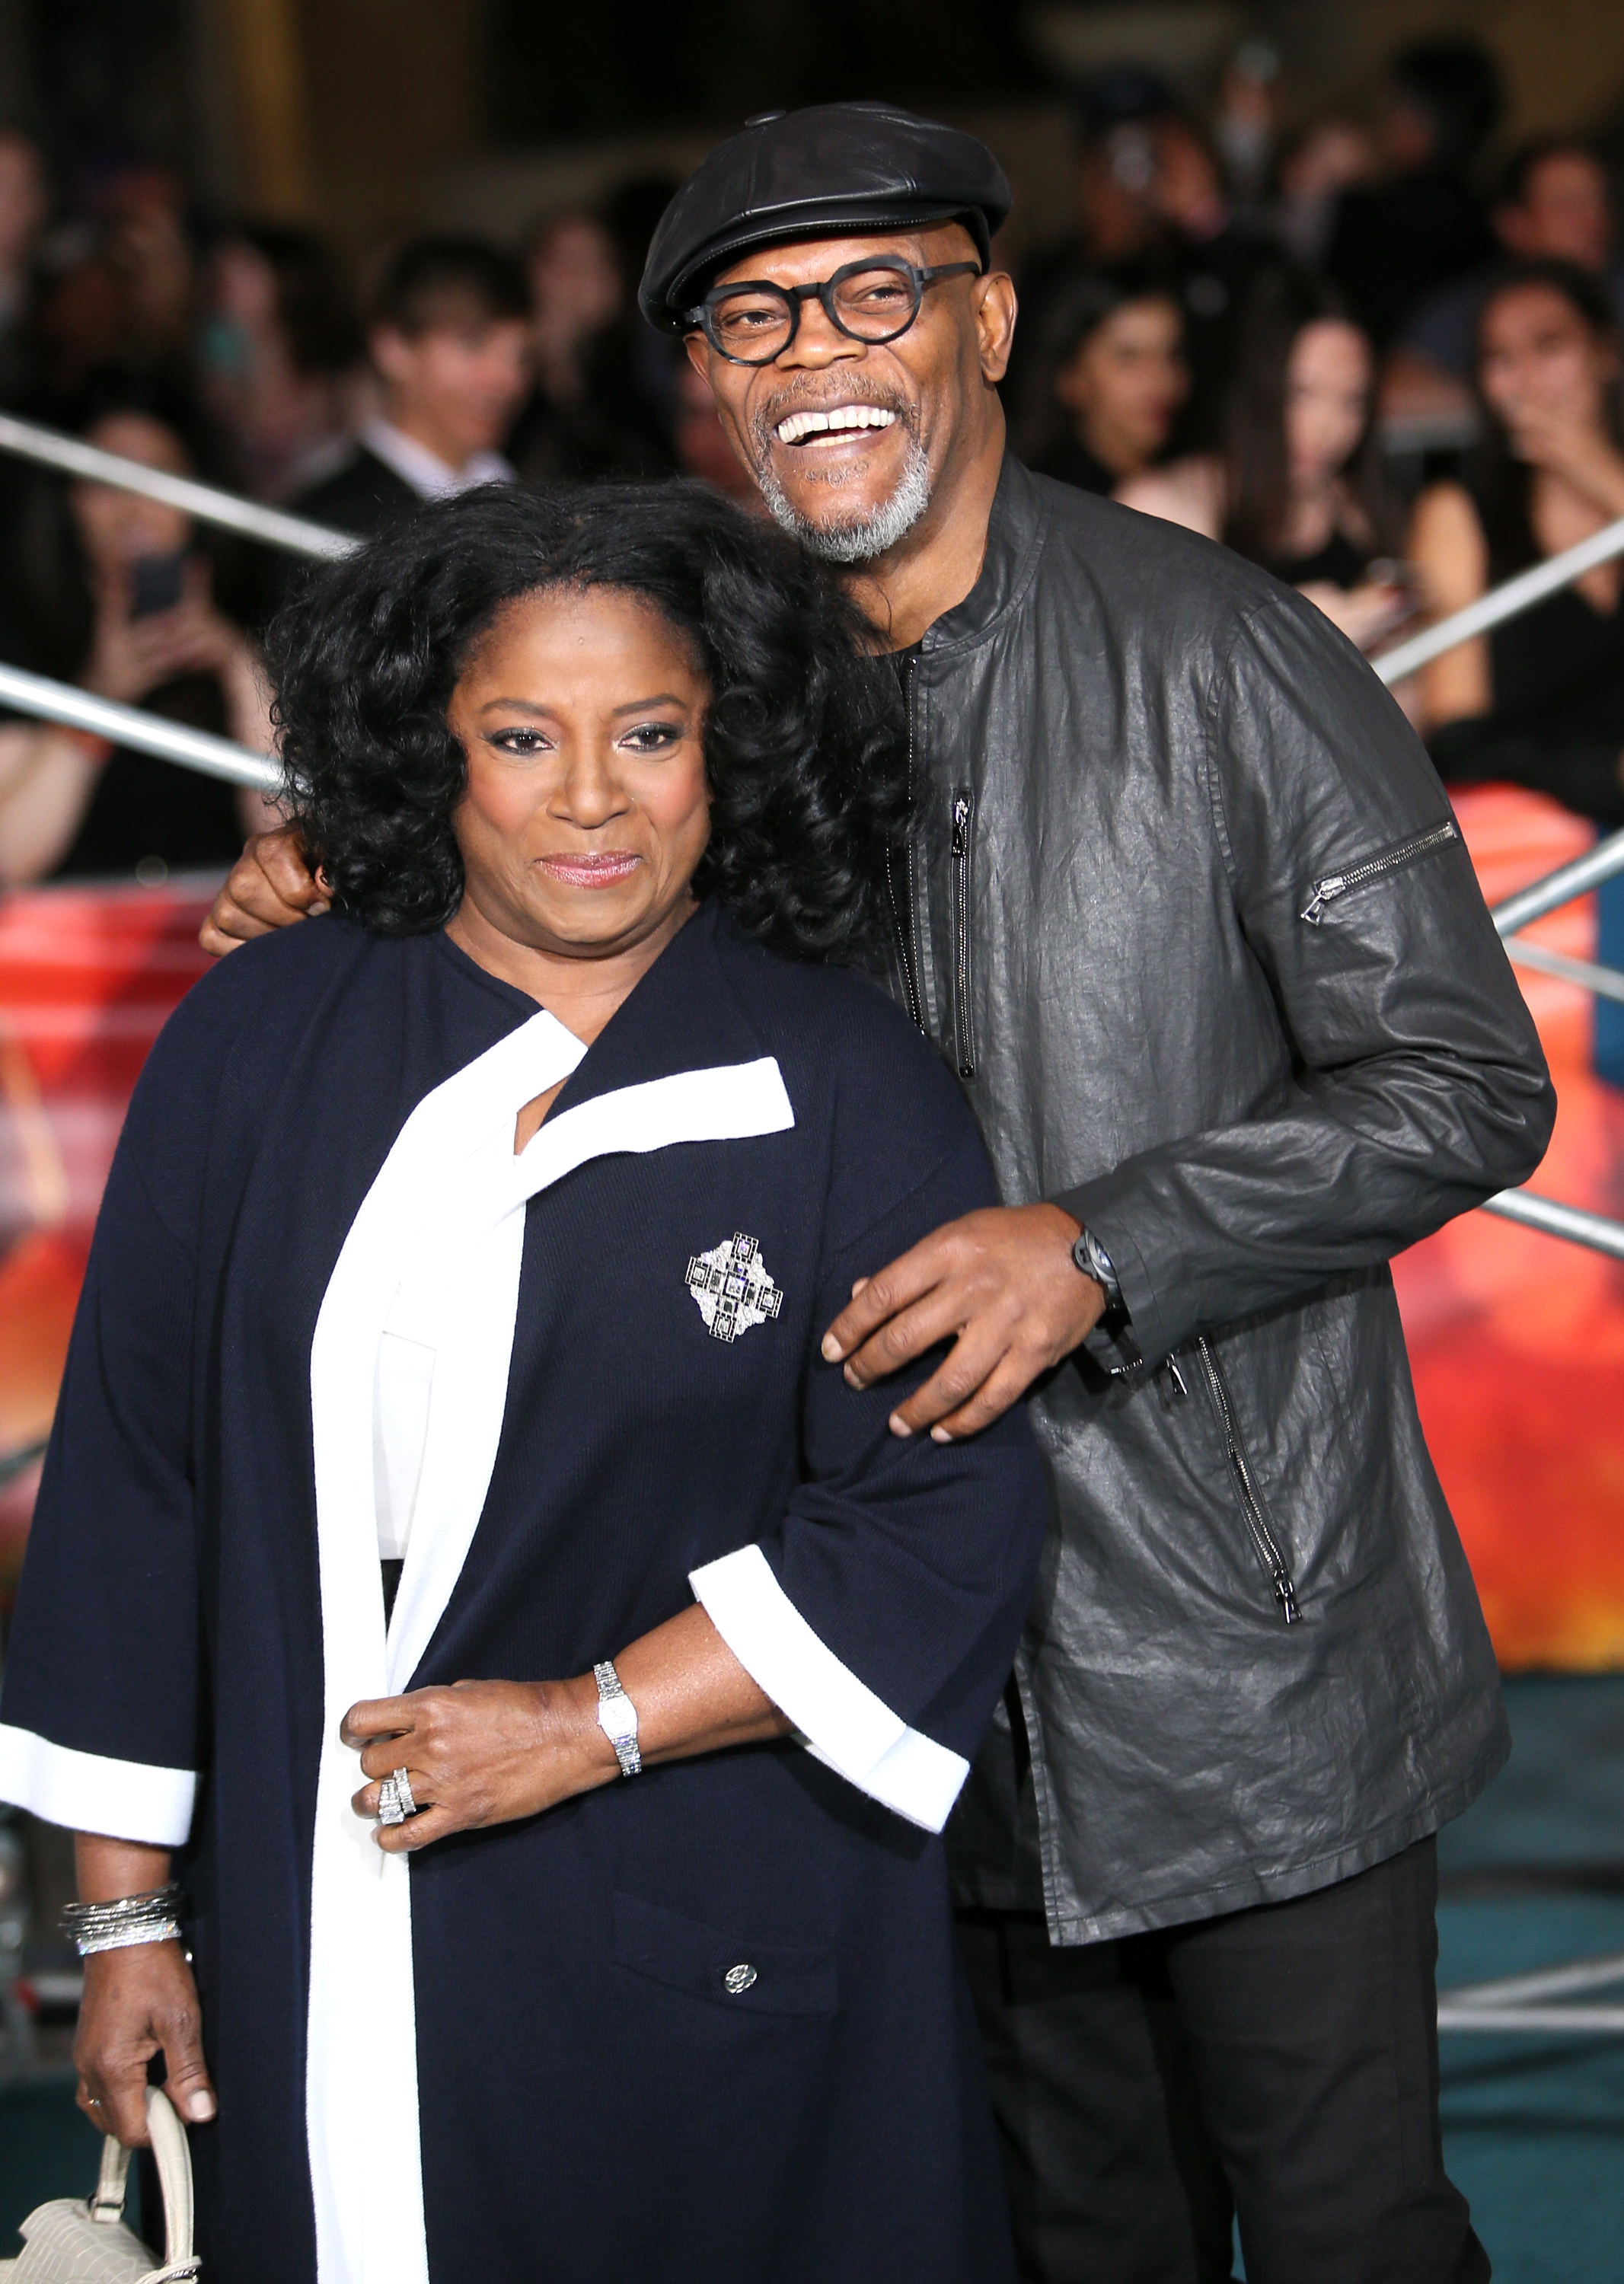 Samuel L. Jackson (R) and LaTanya Richardson attend the premiere of Warner Bros. Pictures' "Kong: Skull Island" at Dolby Theatre on March 8, 2017 in Hollywood, California | Source: Getty Images